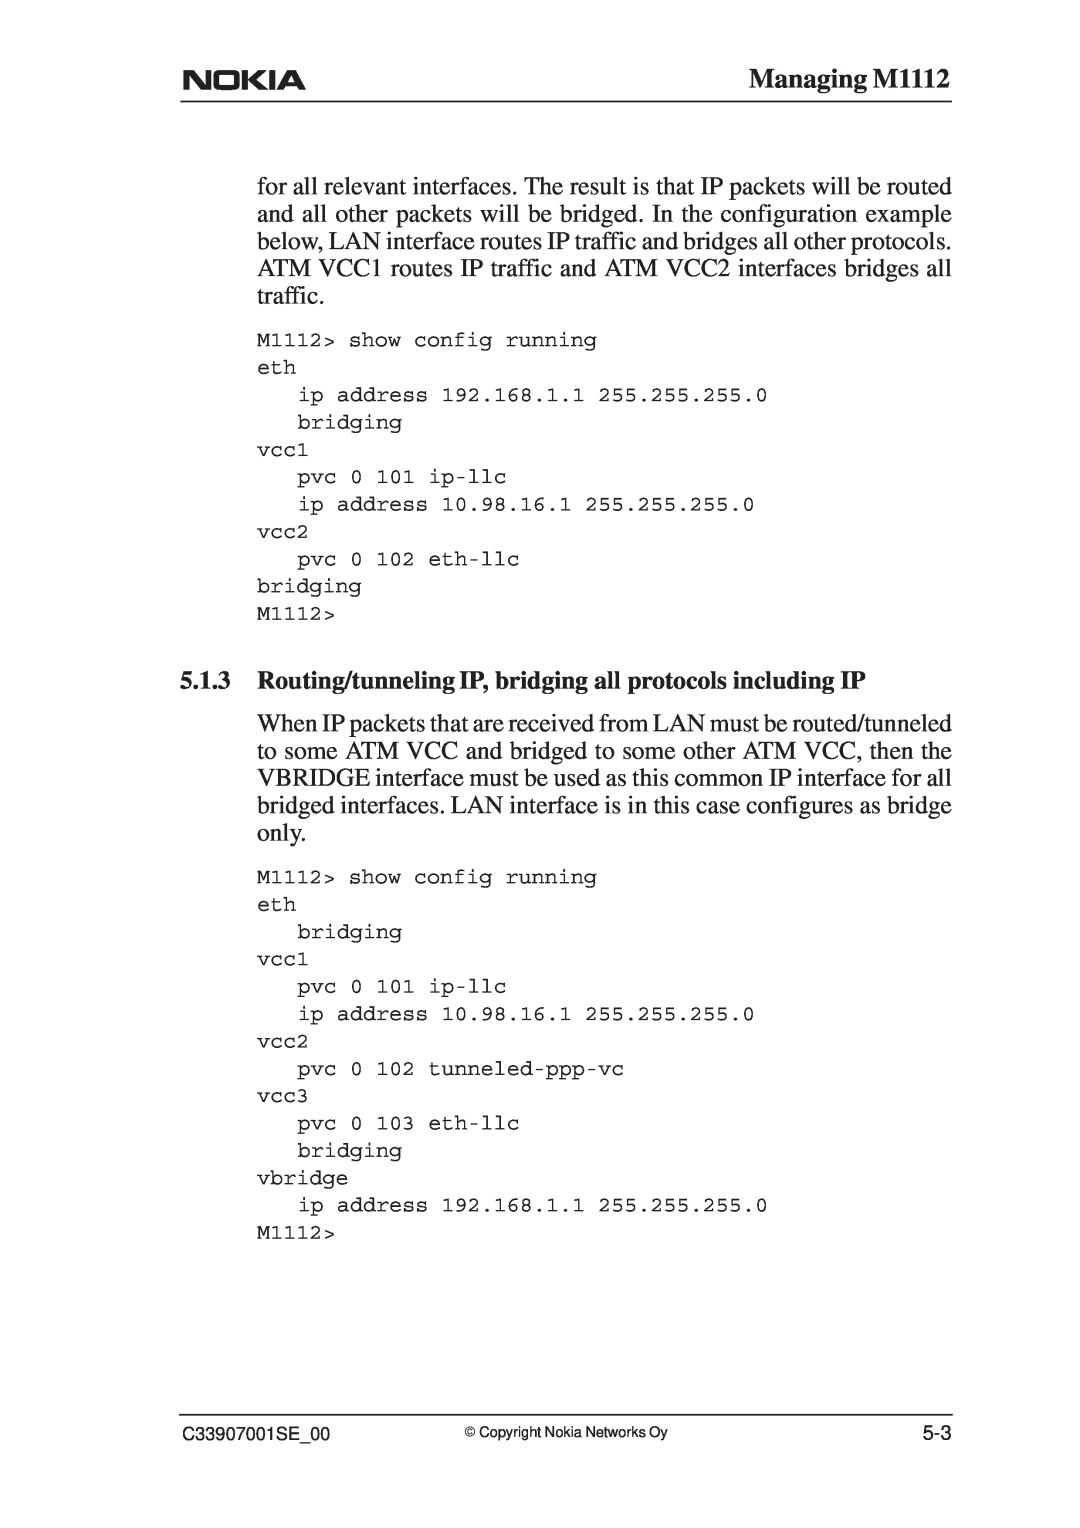 Nokia manual Managing M1112, Routing/tunneling IP, bridging all protocols including IP 